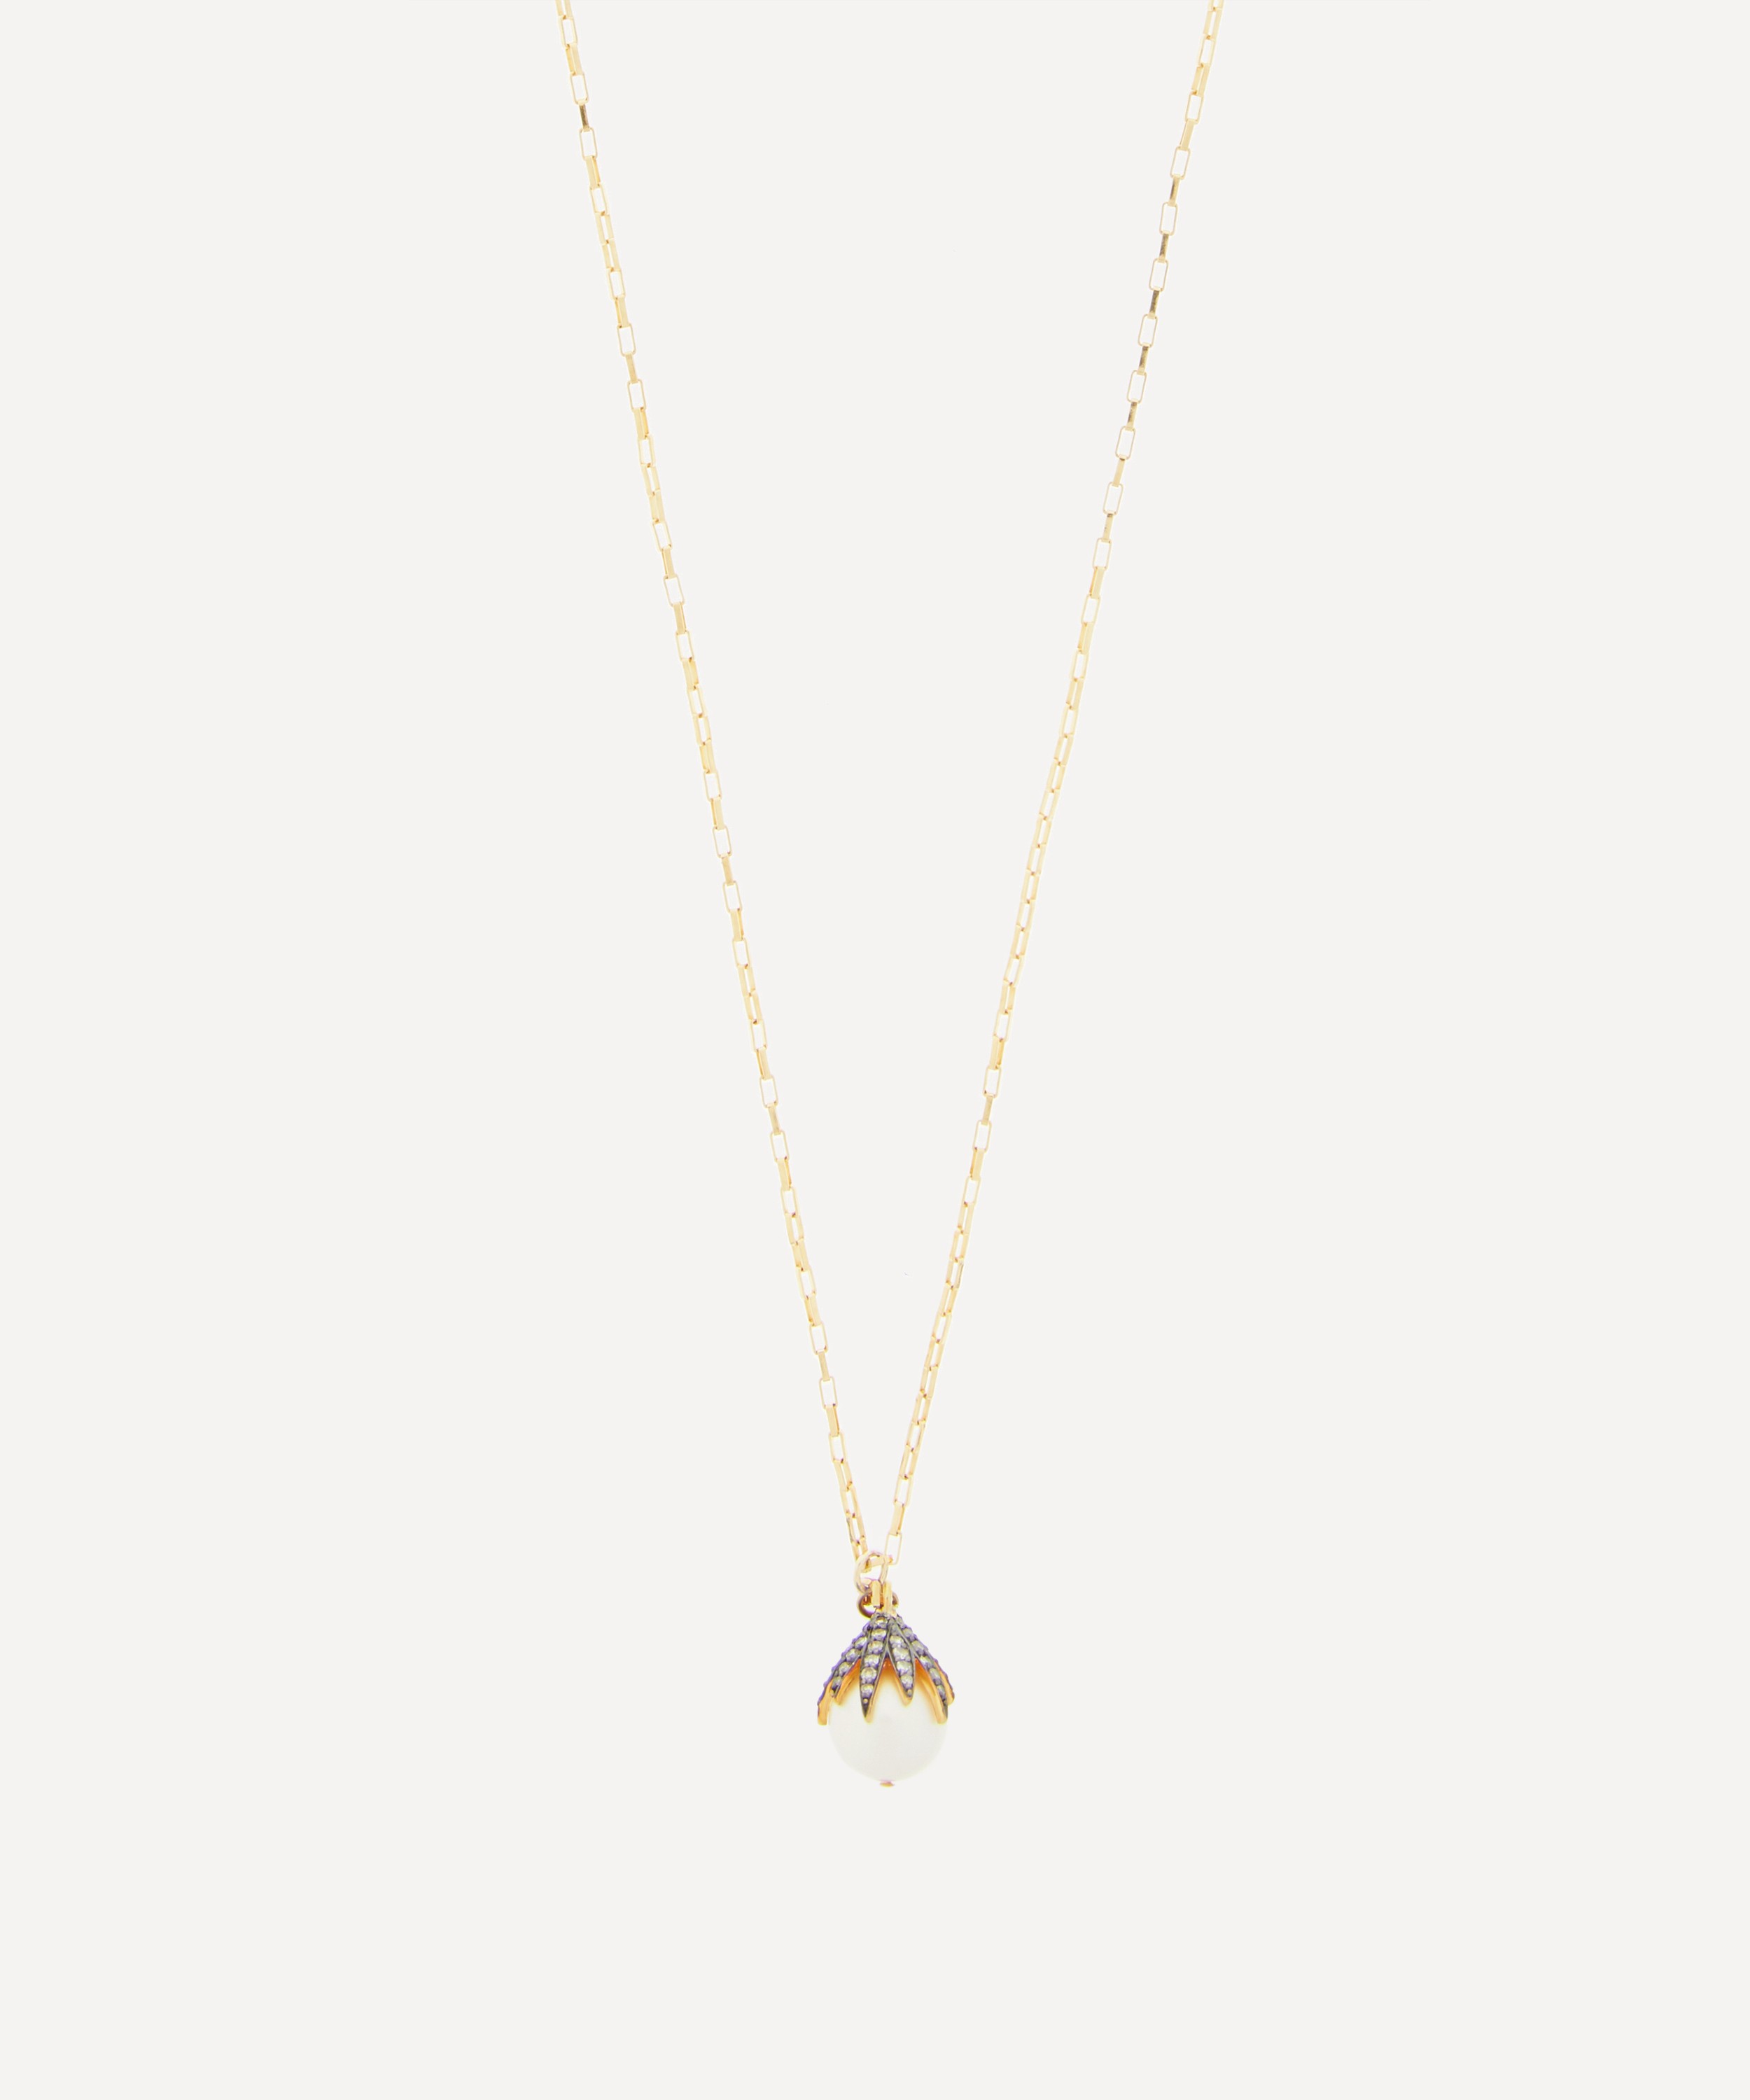 Kirstie Le Marque - Gold-Plated Diamond Claw and Pearl Pendant Necklace